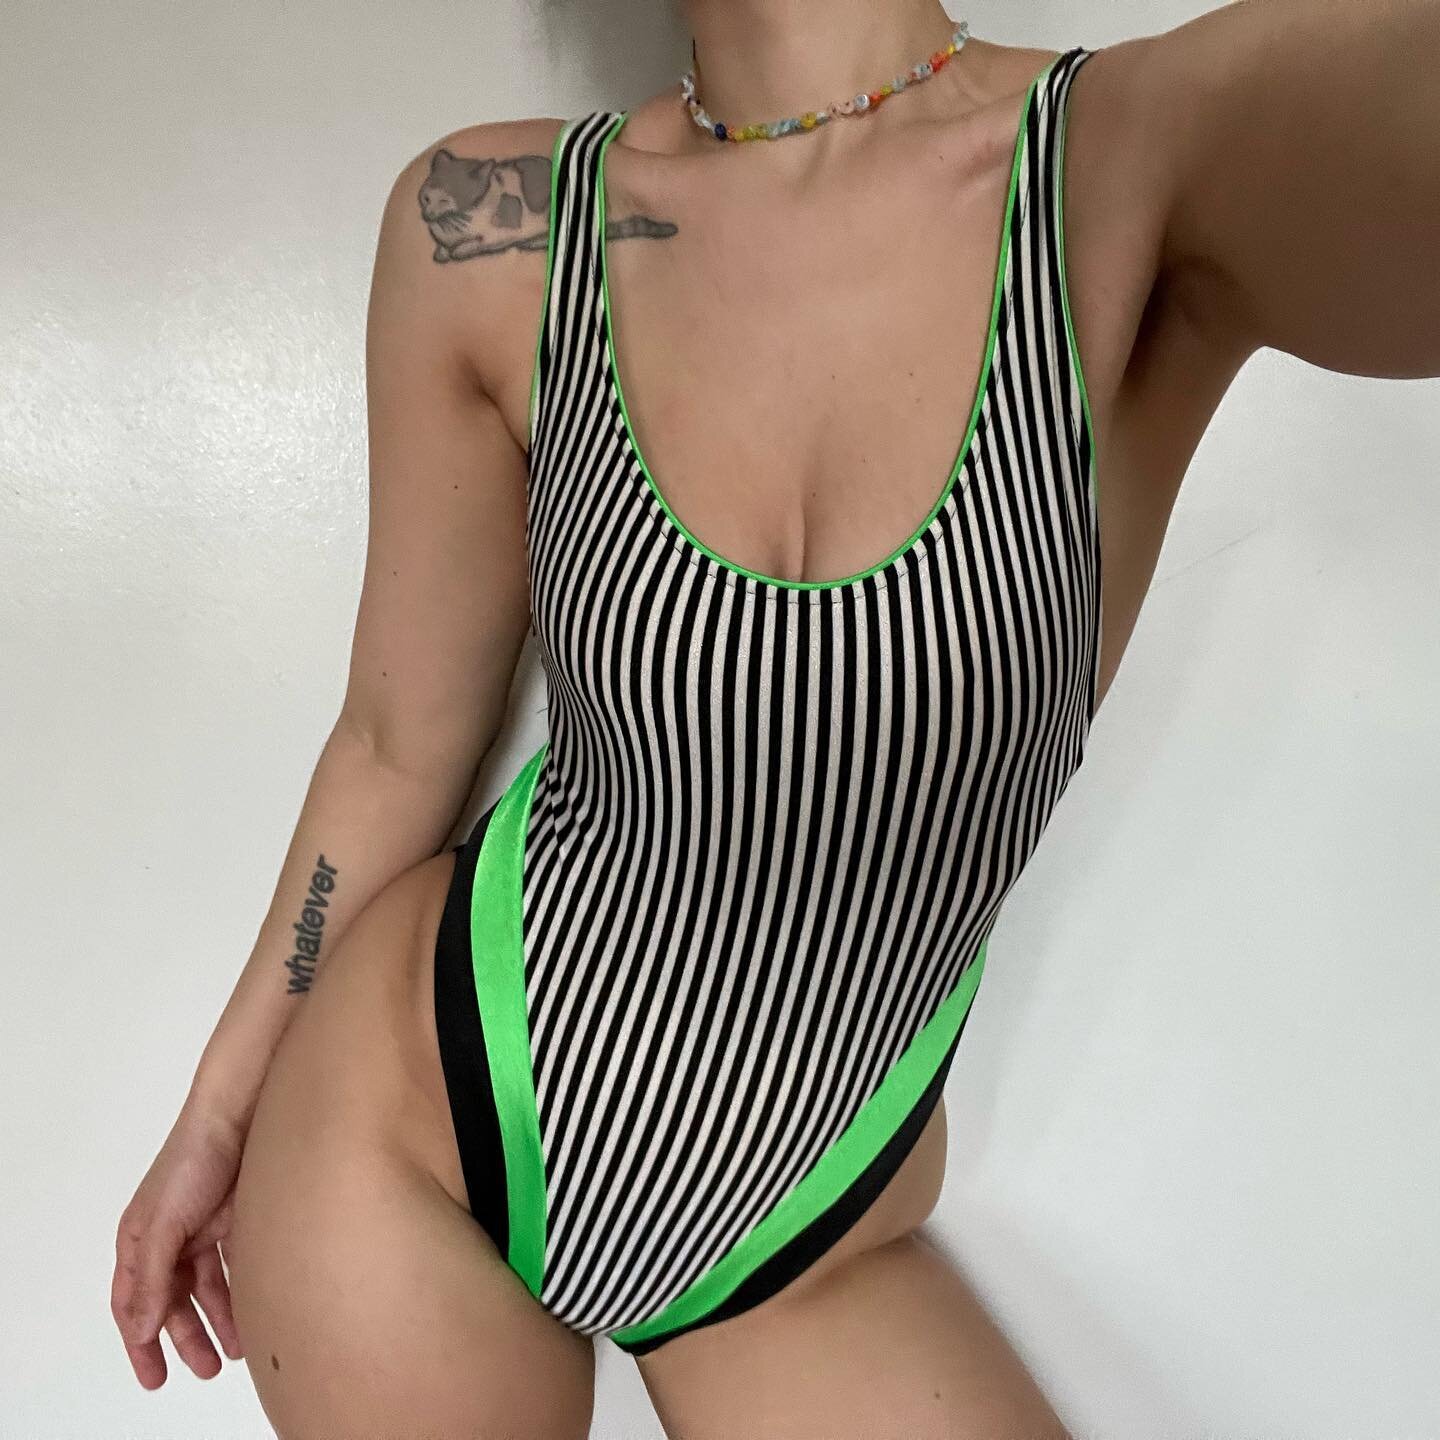 📞the 1980s are calling. This bold one piece is super high leg and has a plunging neckline and criss cross straps in the back. Super rare &amp; fun as hell. Size marked 9/10, runs small like a 6 &bull; $55 &bull; dm to purchase